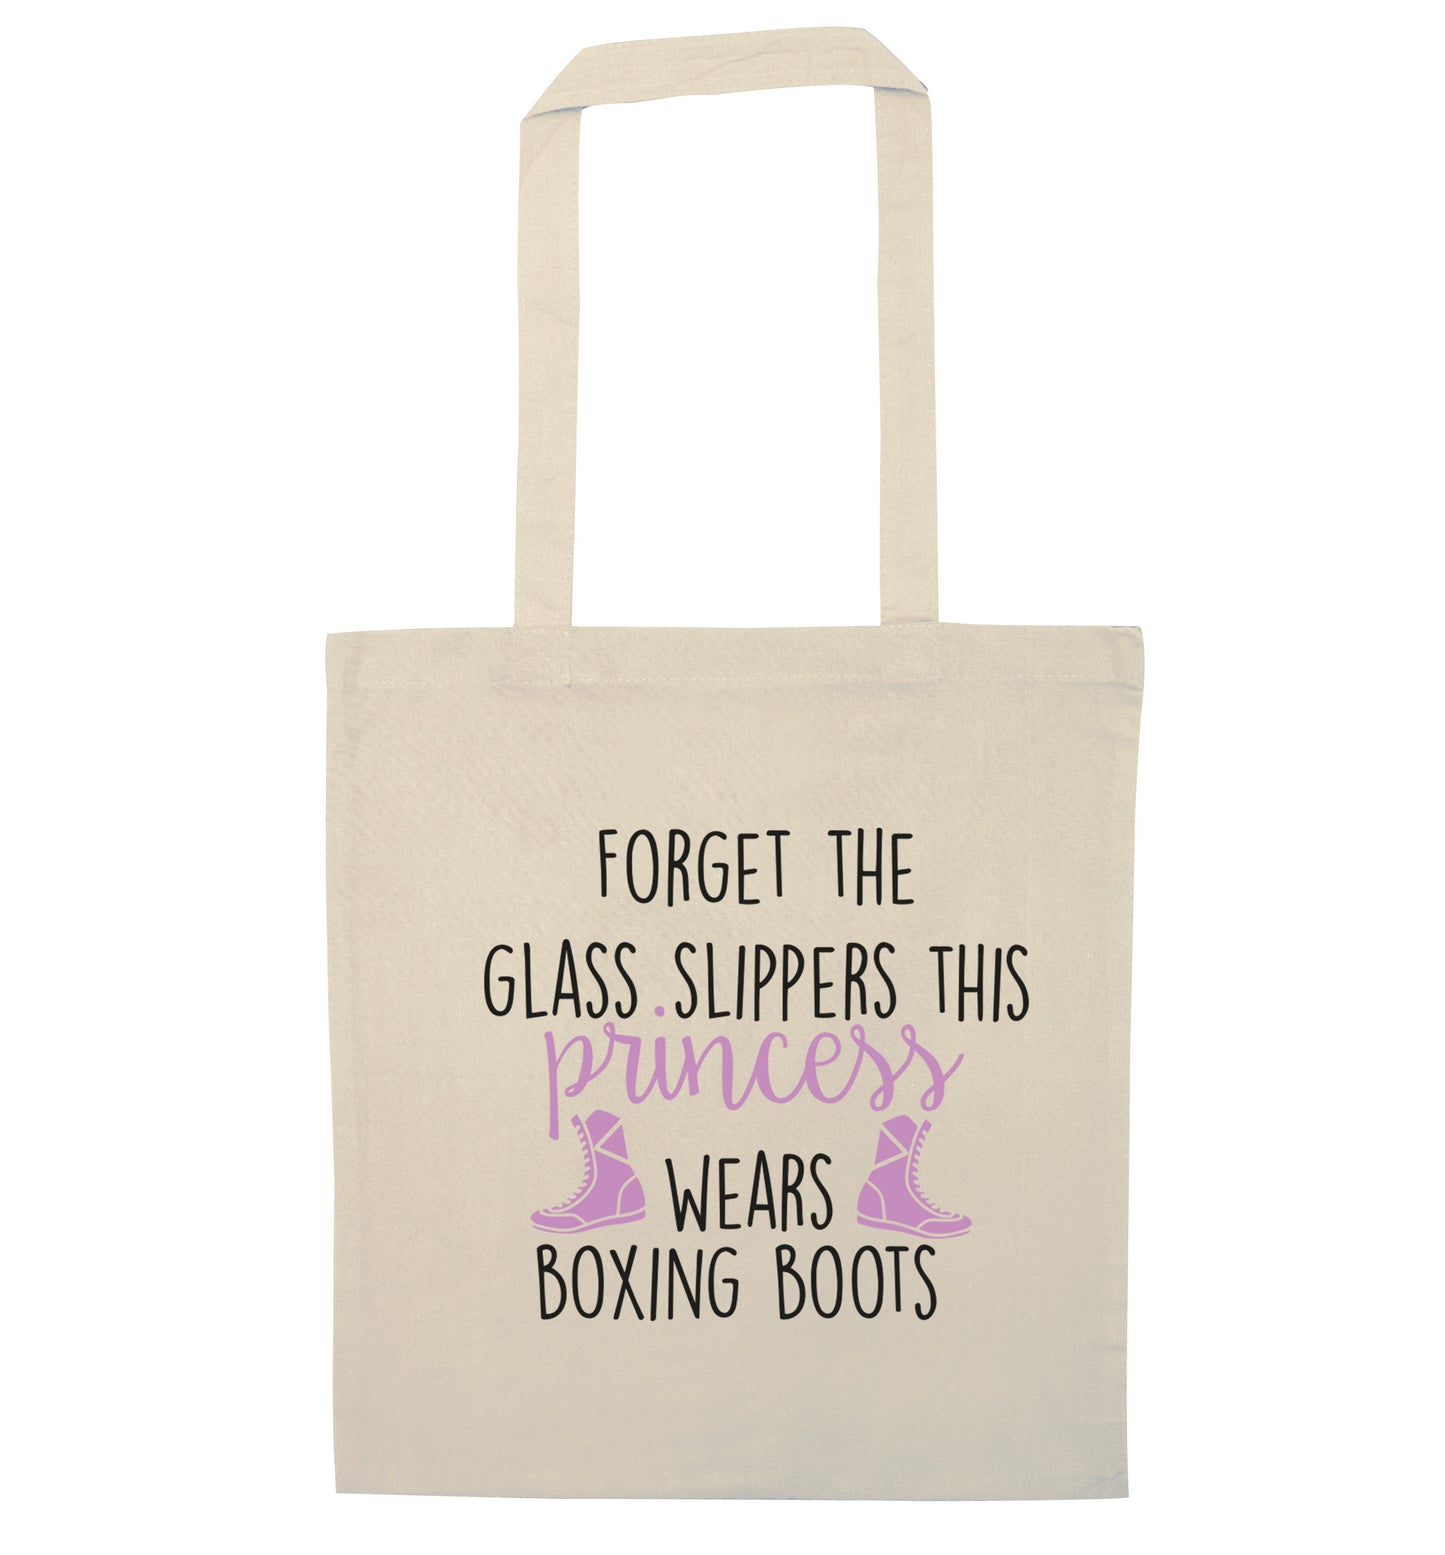 Forget the glass slippers this princess wears boxing boots natural tote bag